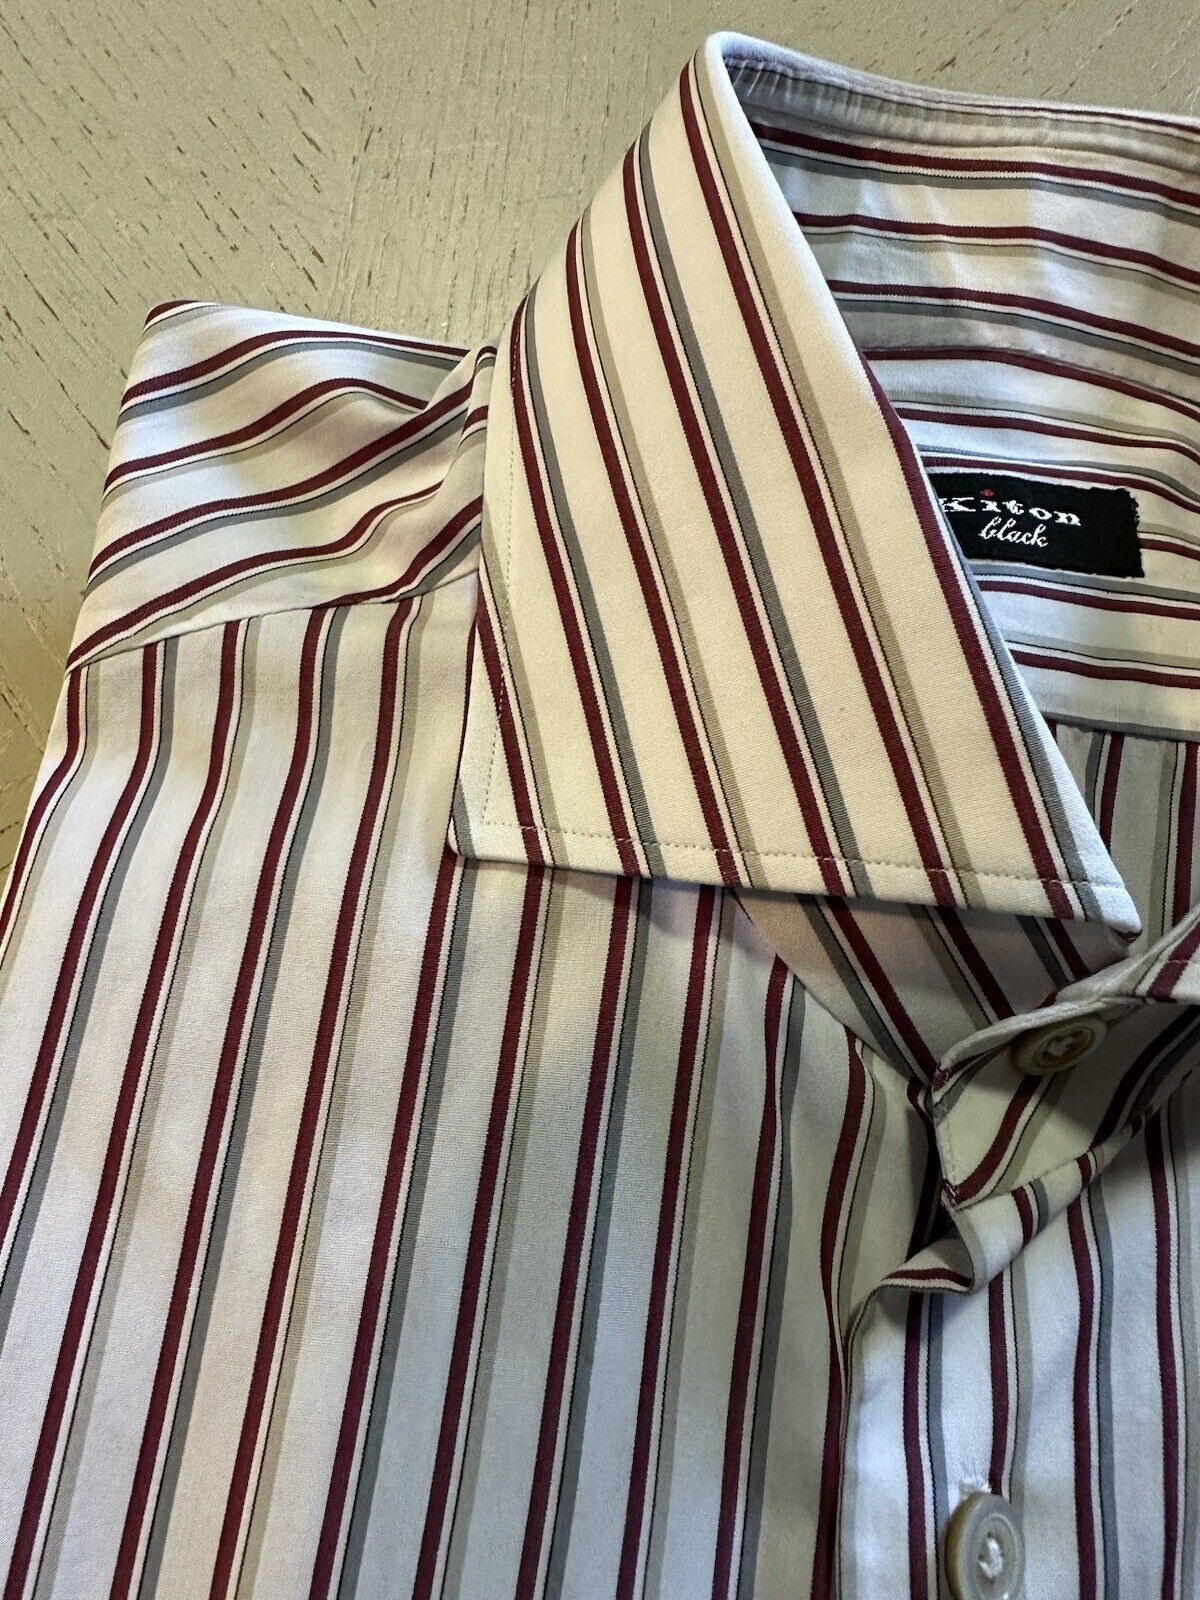 $1195 Kiton Classic Dress Shirt White/Red Stripped Size 42/16.5  Italy